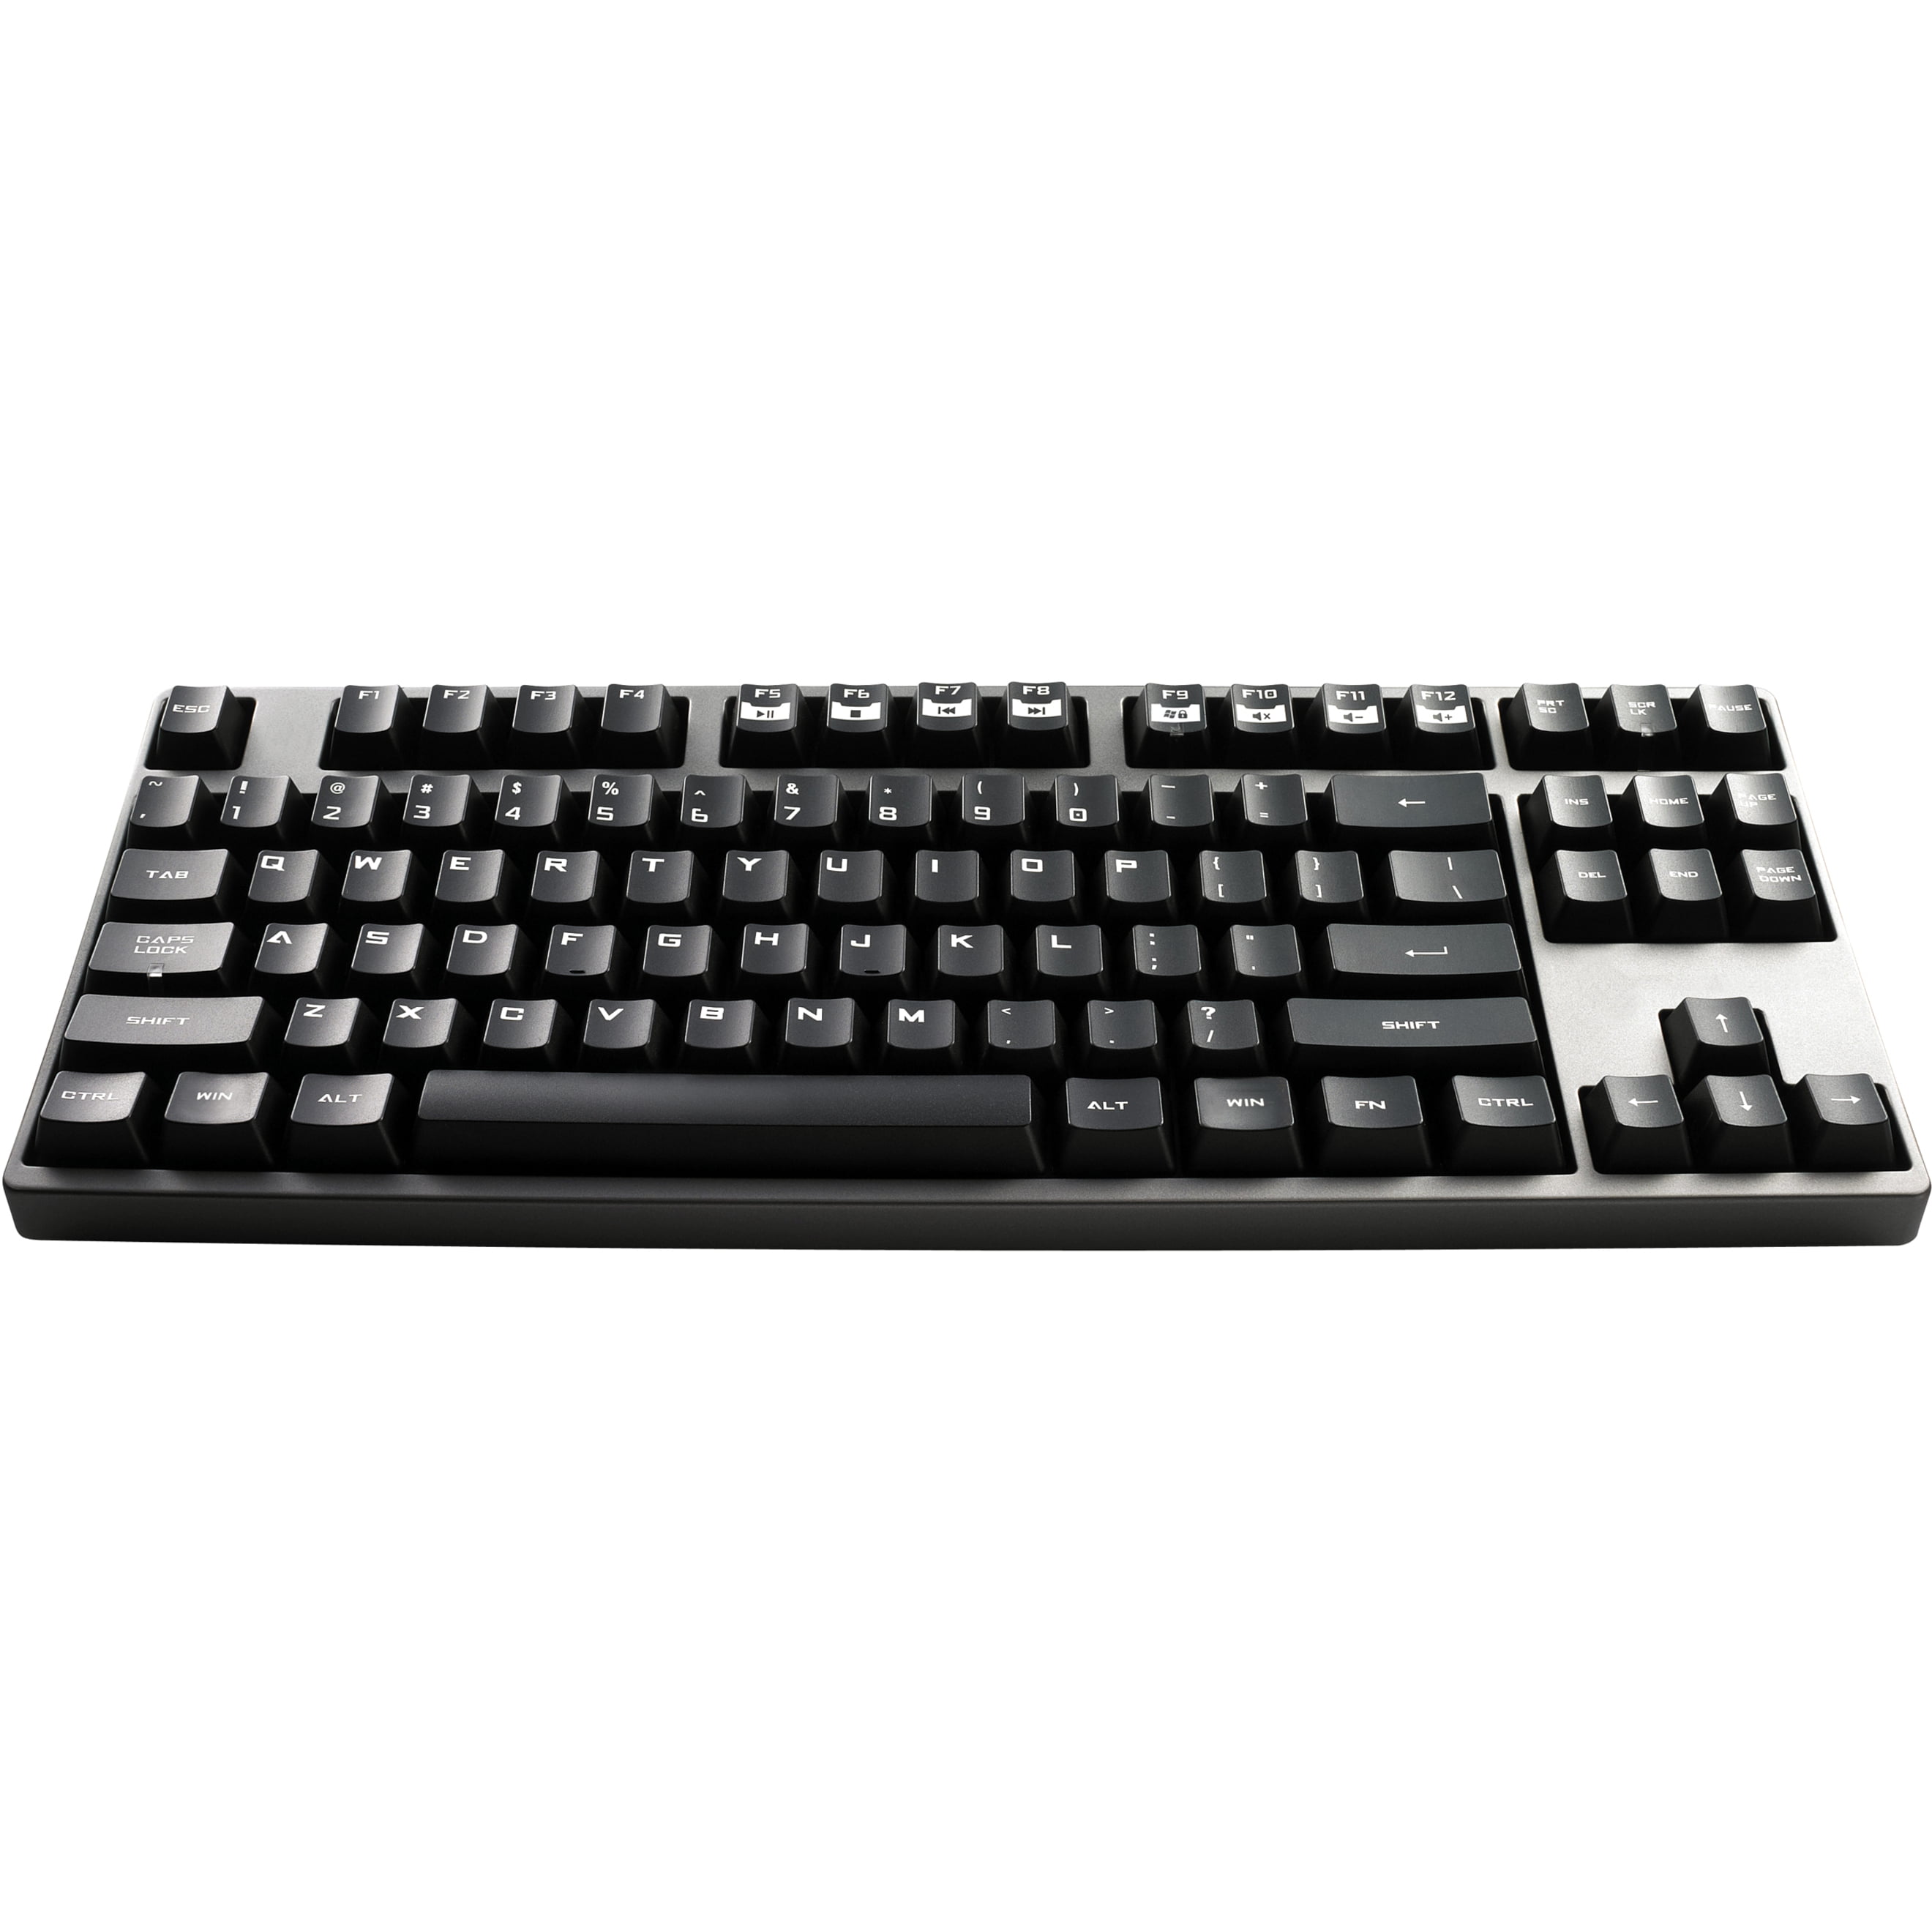 SINGLE REPLACEMENT KEY CAP CM QUICK FIRE RAPID-I MECHANICAL GAMING KEYBOARD.READ 